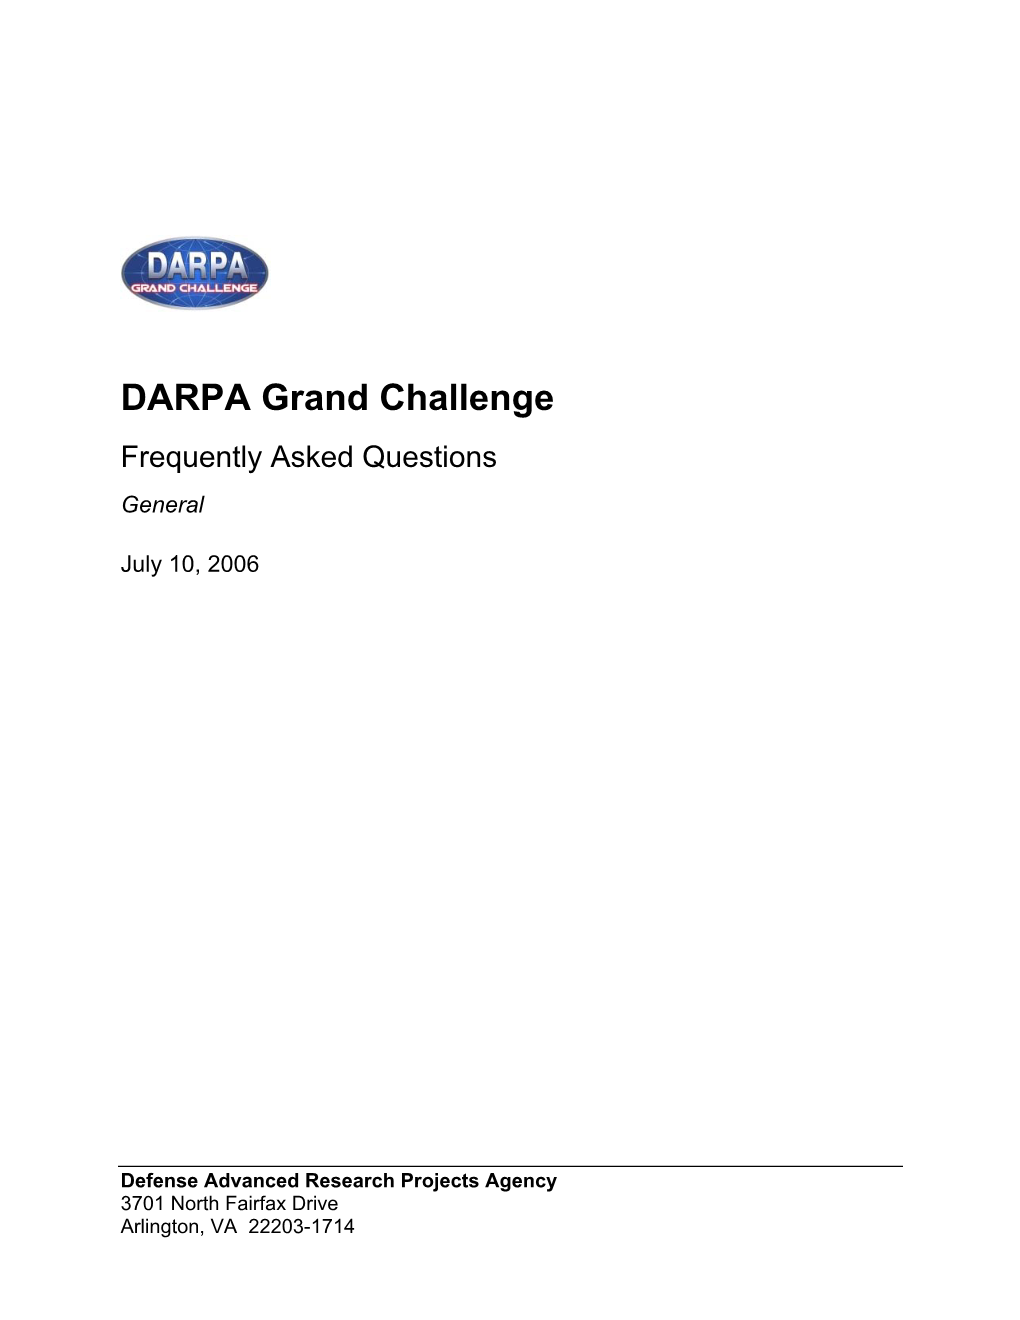 DARPA Grand Challenge Frequently Asked Questions General